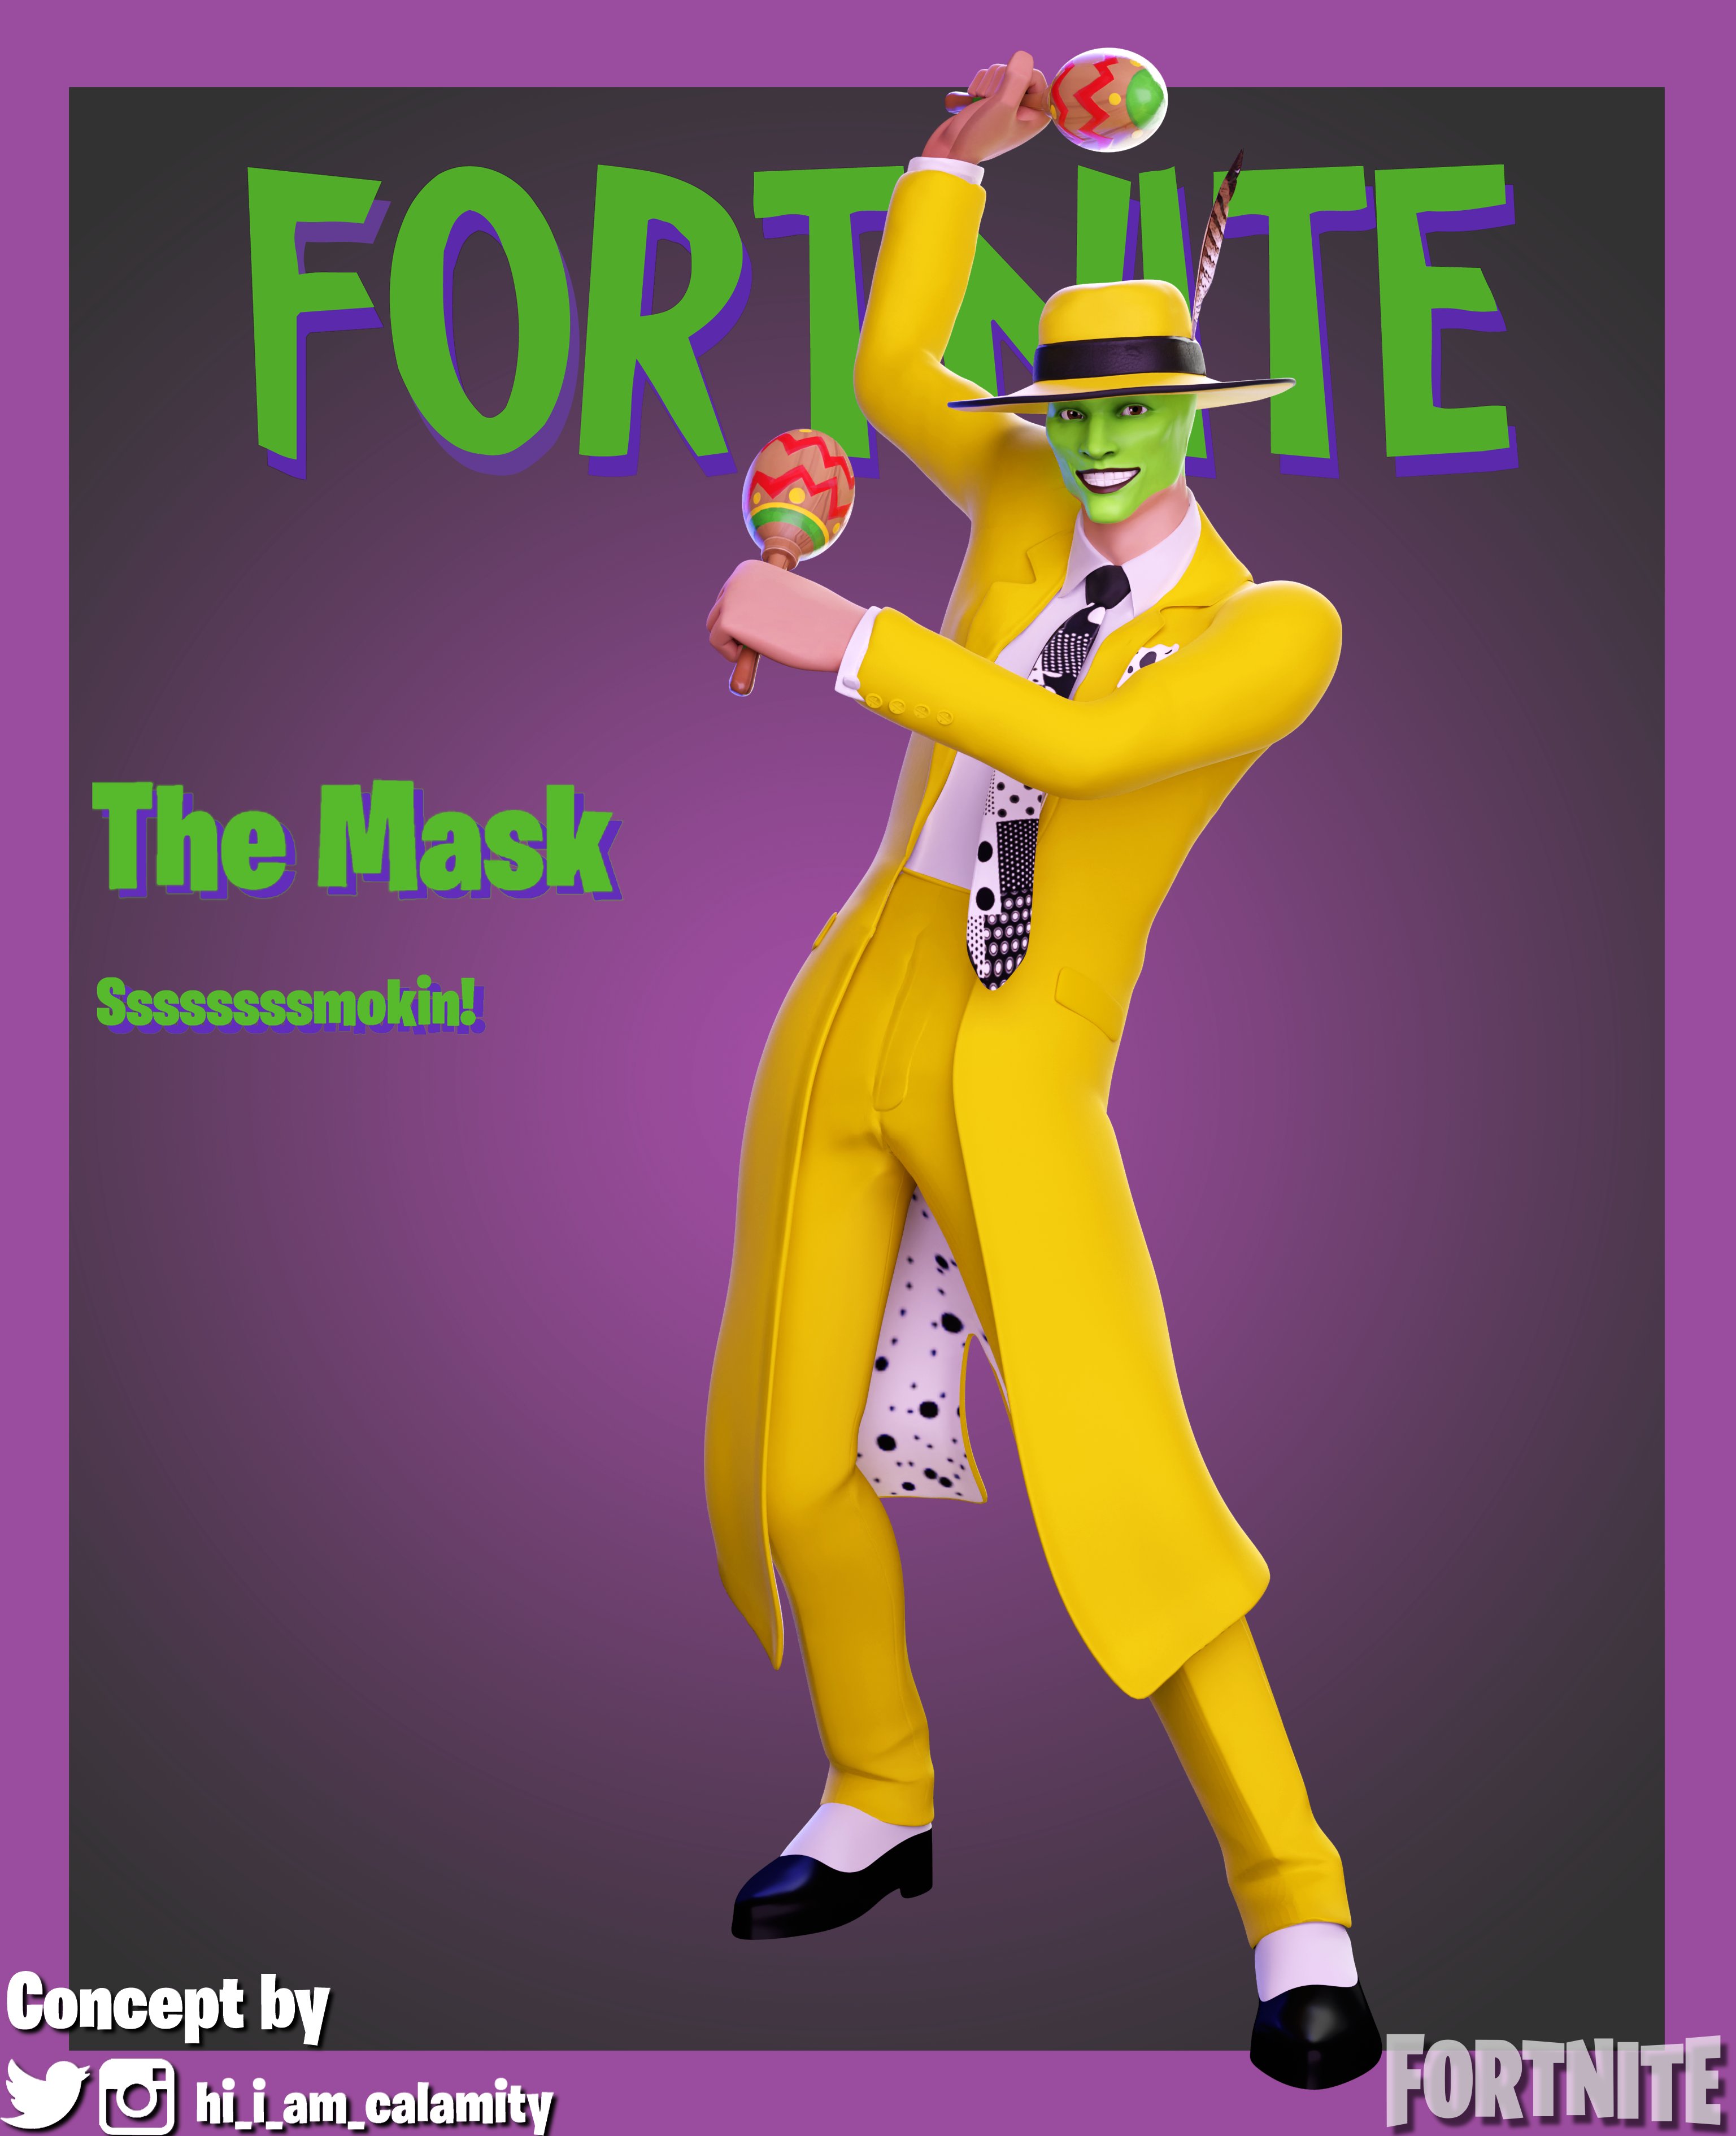 hi_i_am_calamity on Twitter: "The Mask - [FORTNITE SKIN CONCEPT]  Ssssssssmokin! I think The Mask was one of the most funny movie before 2000  and one of my favorite of Jim Carrey! I'